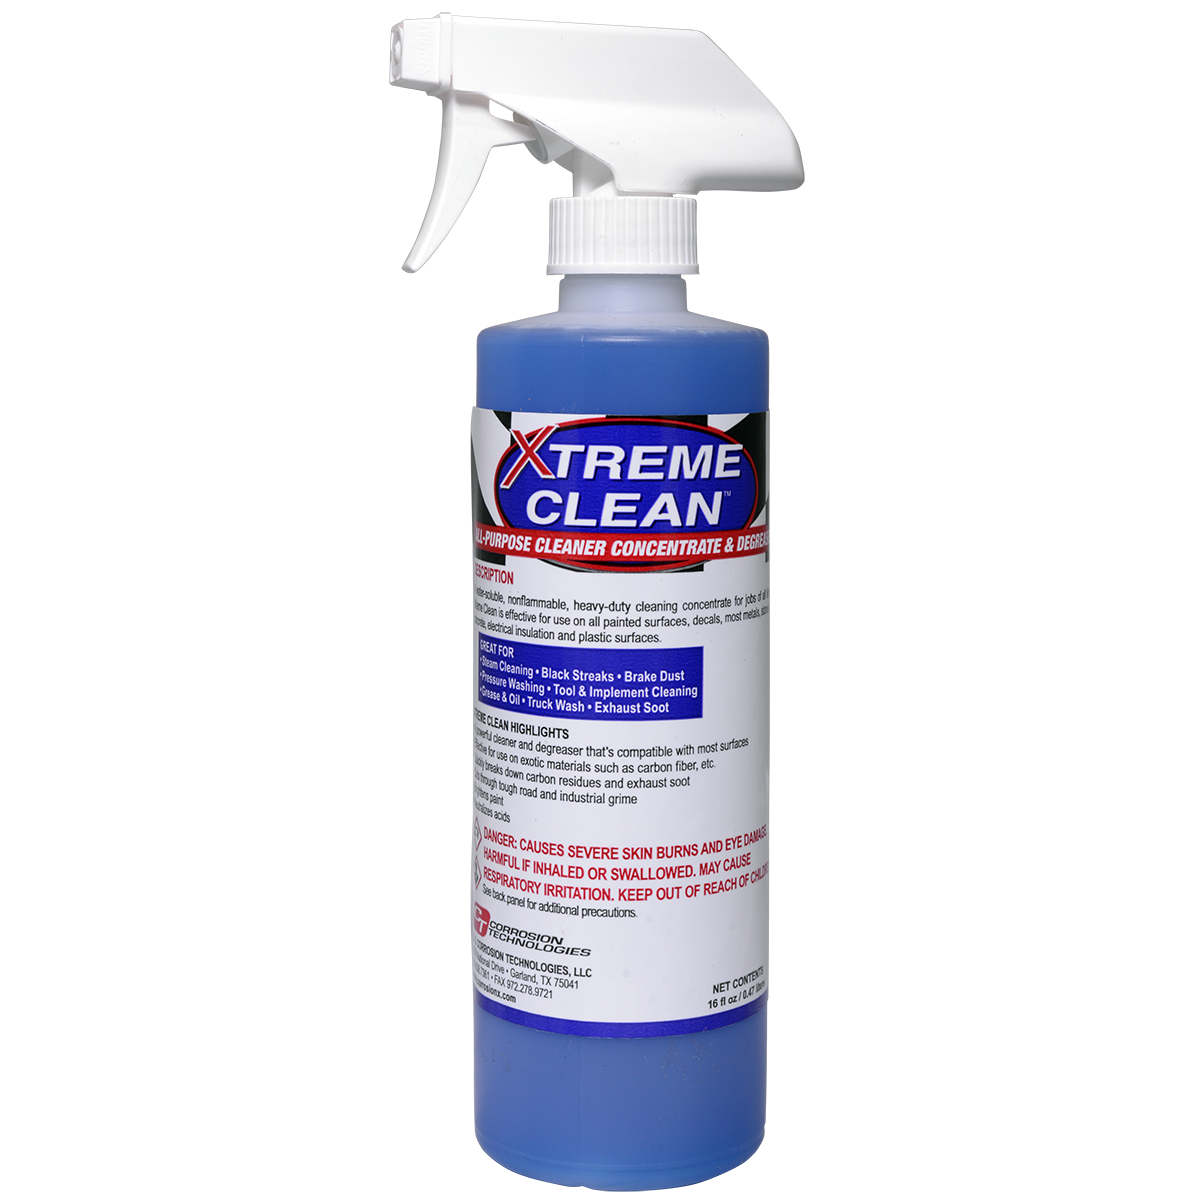 Xtreme Clean general purpose cleaner / degreaser